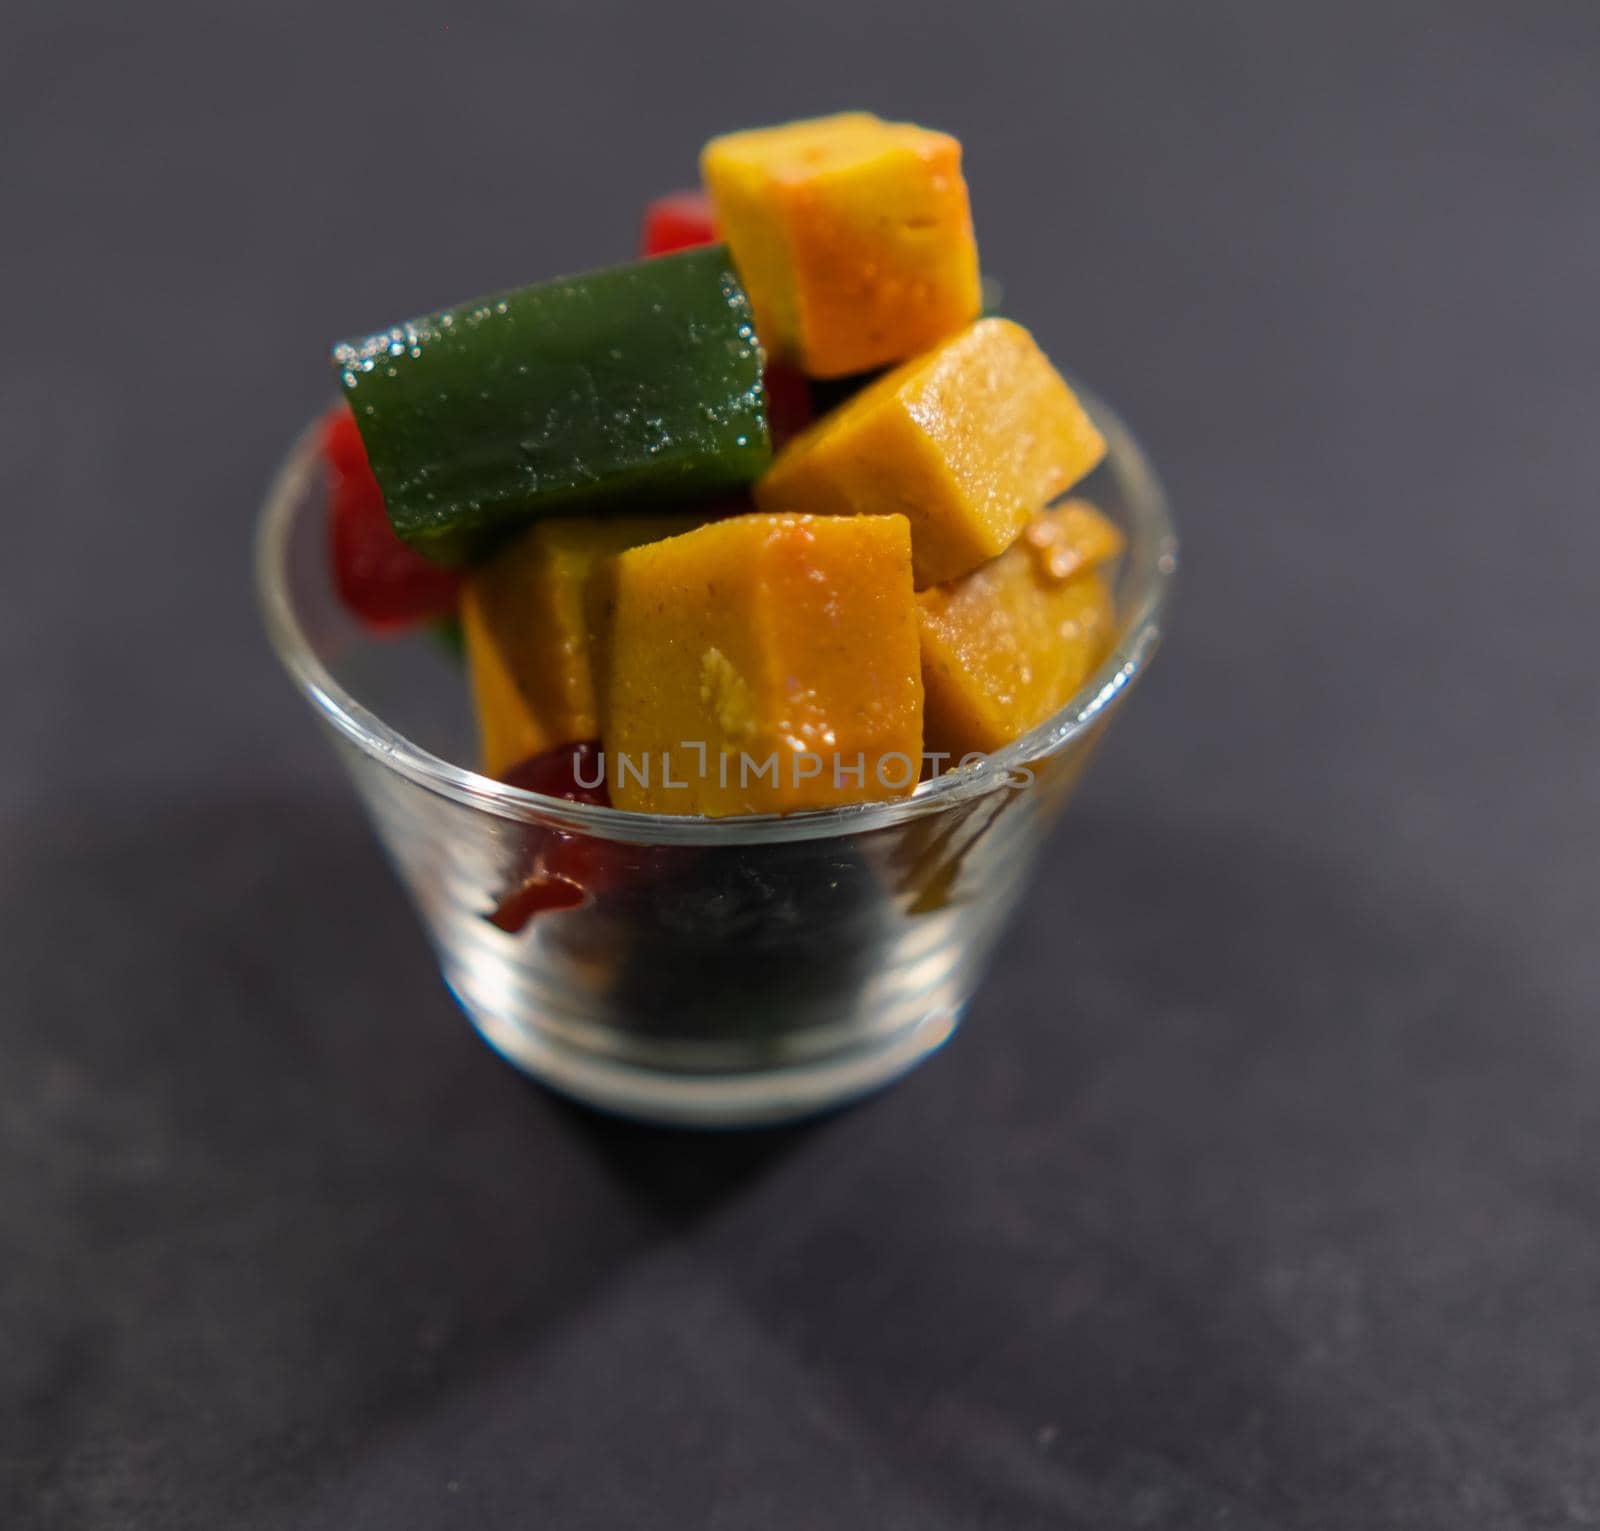 Close-up of glass of red, yellow, and green fruit paste slices on black surface. Authentic colorful and natural Mexican candy cubes in glass cup. Tasty traditional snacks